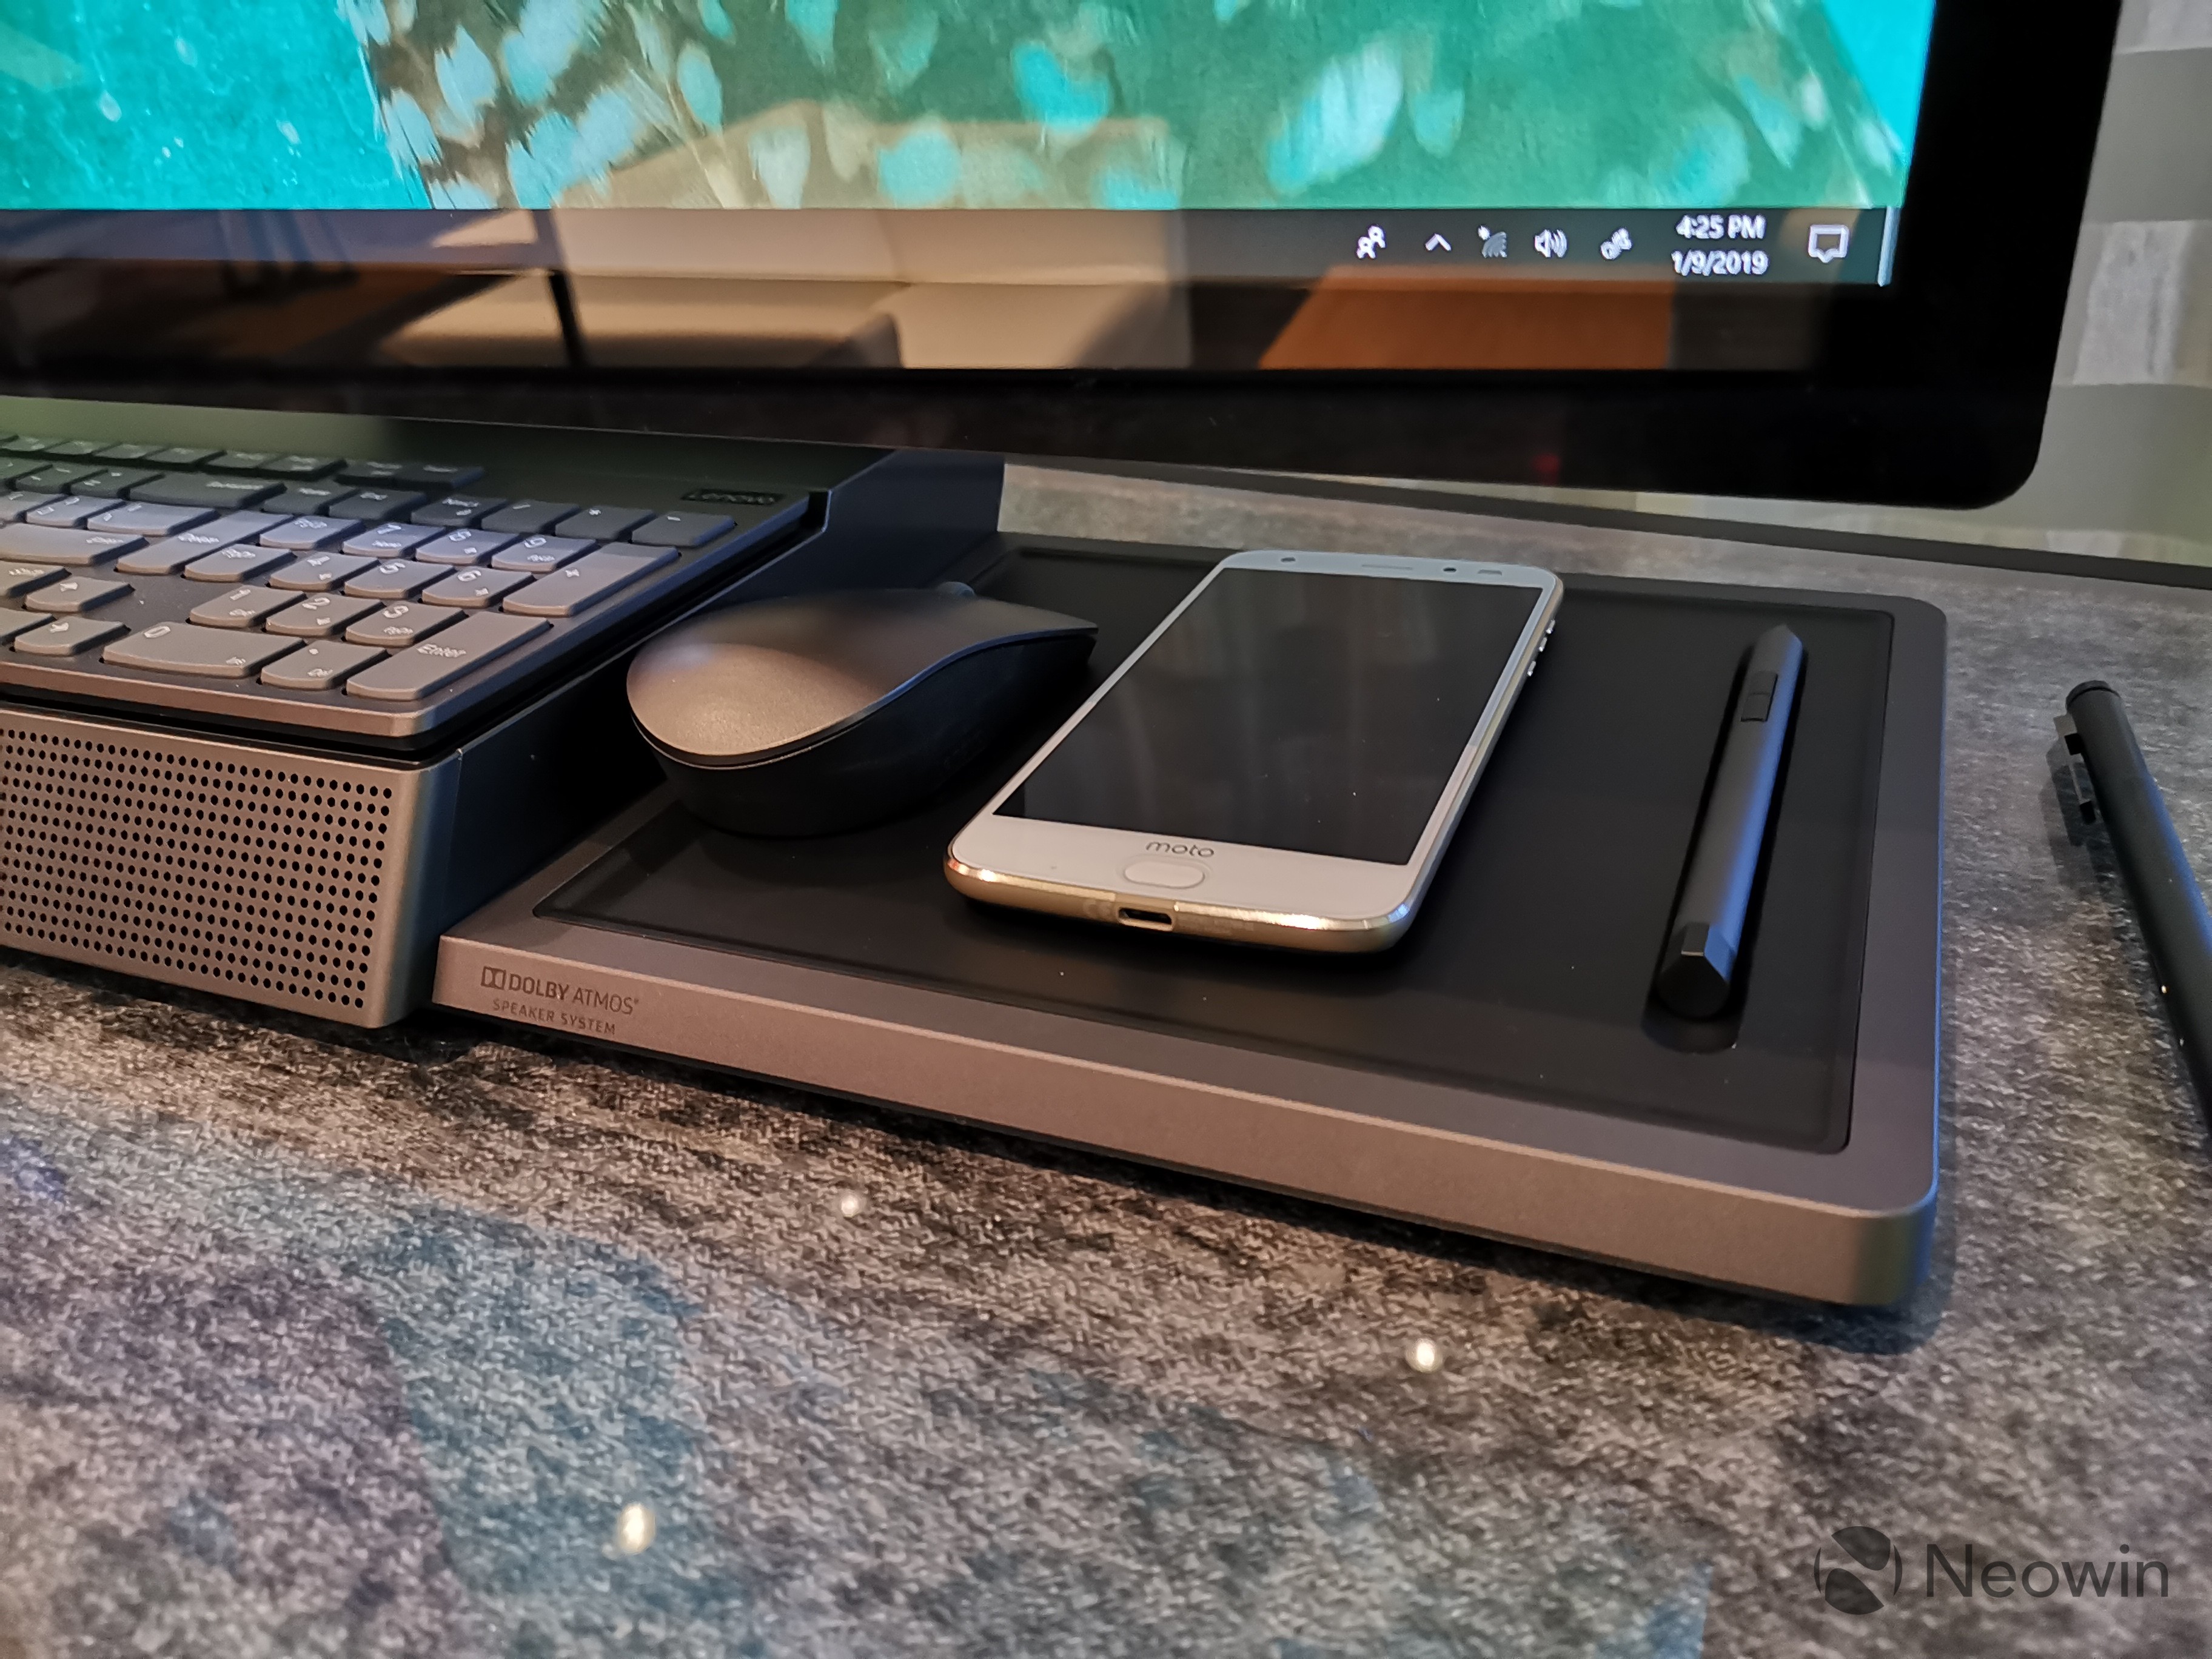 Hands on with Lenovo's Yoga A940: It's a Surface Studio killer - Neowin